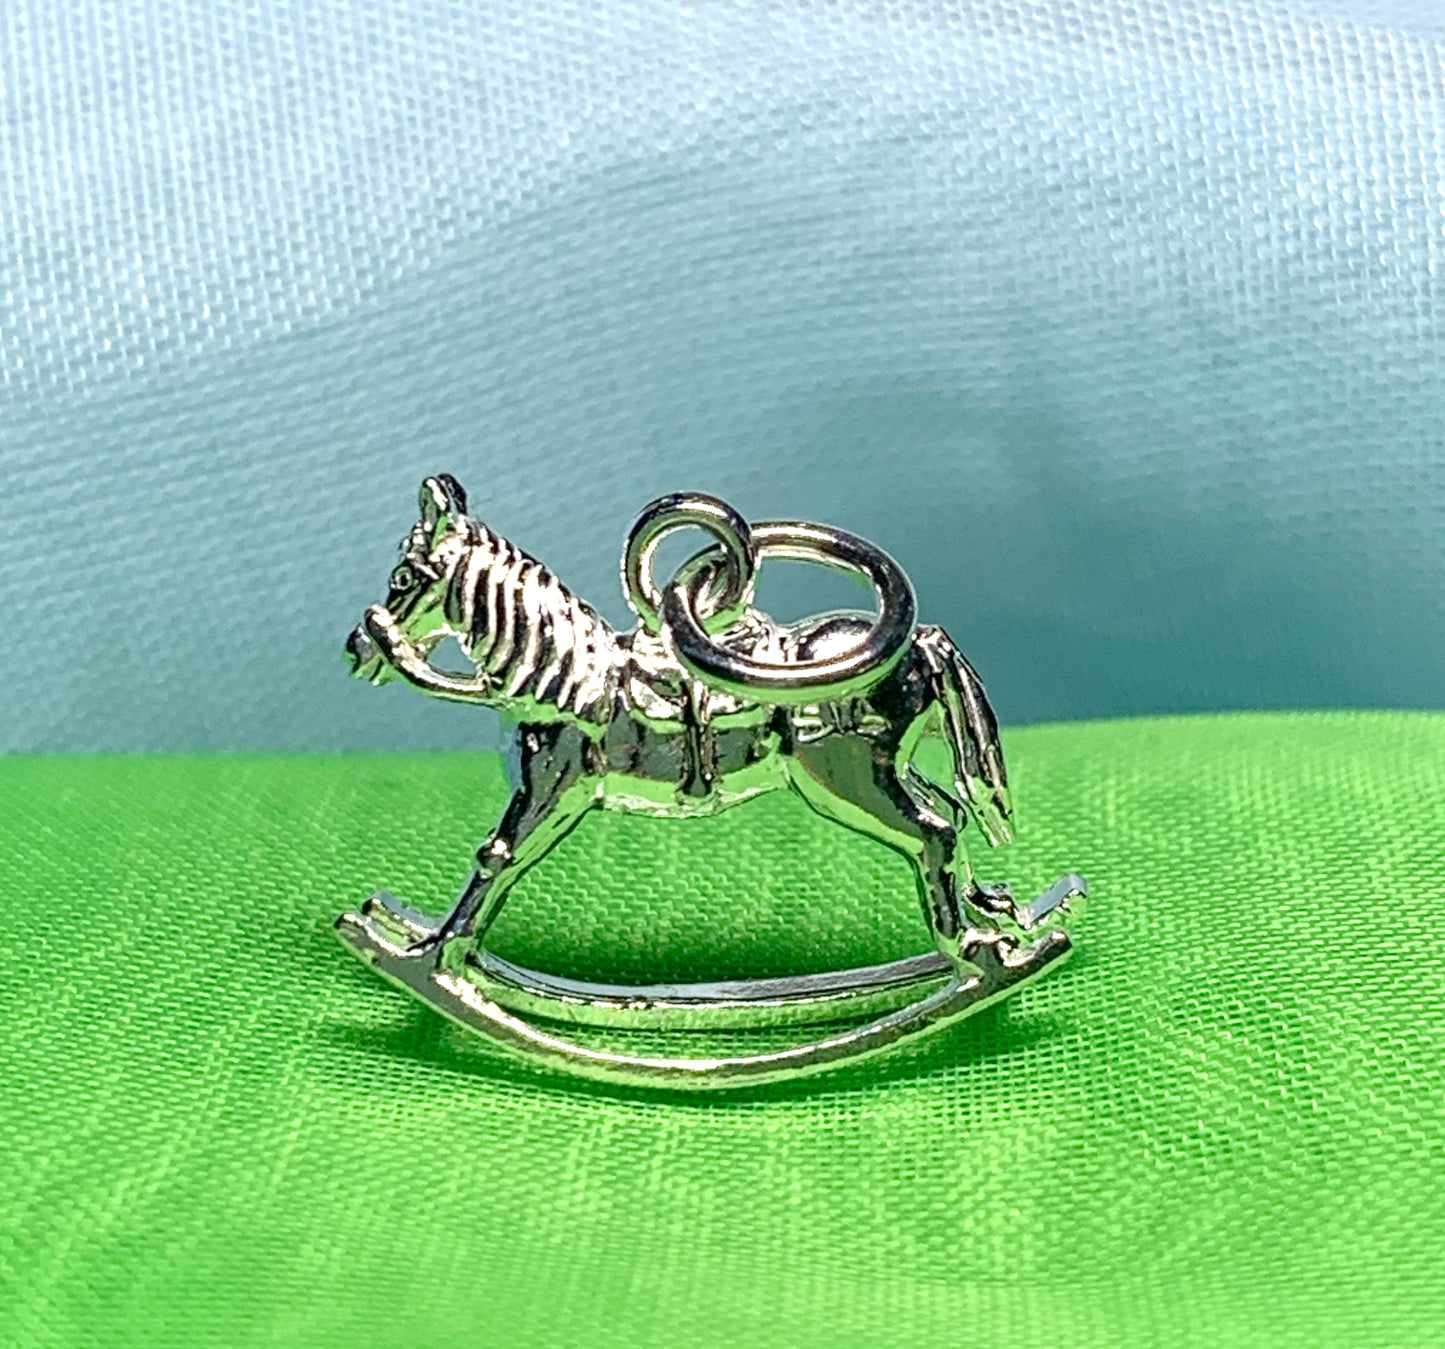 Rocking horse necklace or charm sterling silver